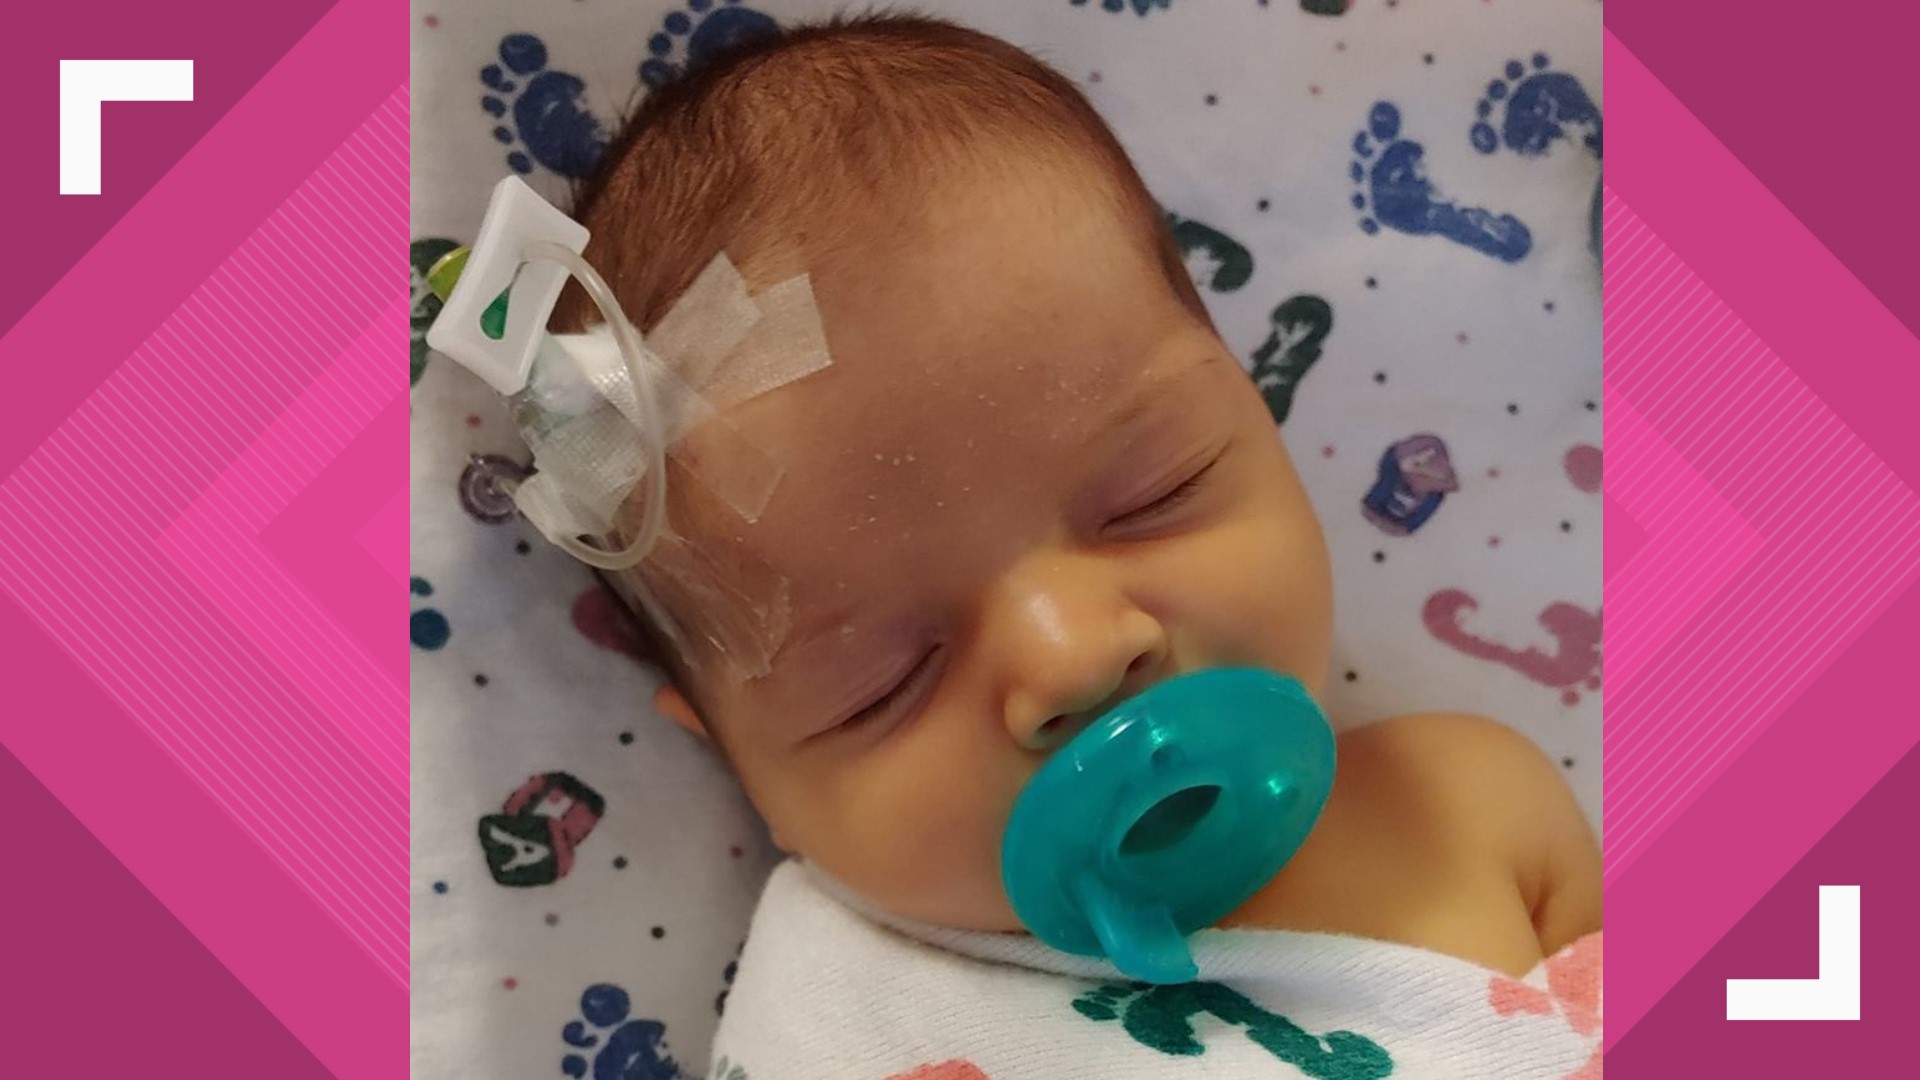 A fundraiser will be held Sunday for Marlee who was born a happy and seemingly healthy baby girl. When she was 5 weeks old, Marlee was diagnosed with biliary atresia – a rare liver disease.